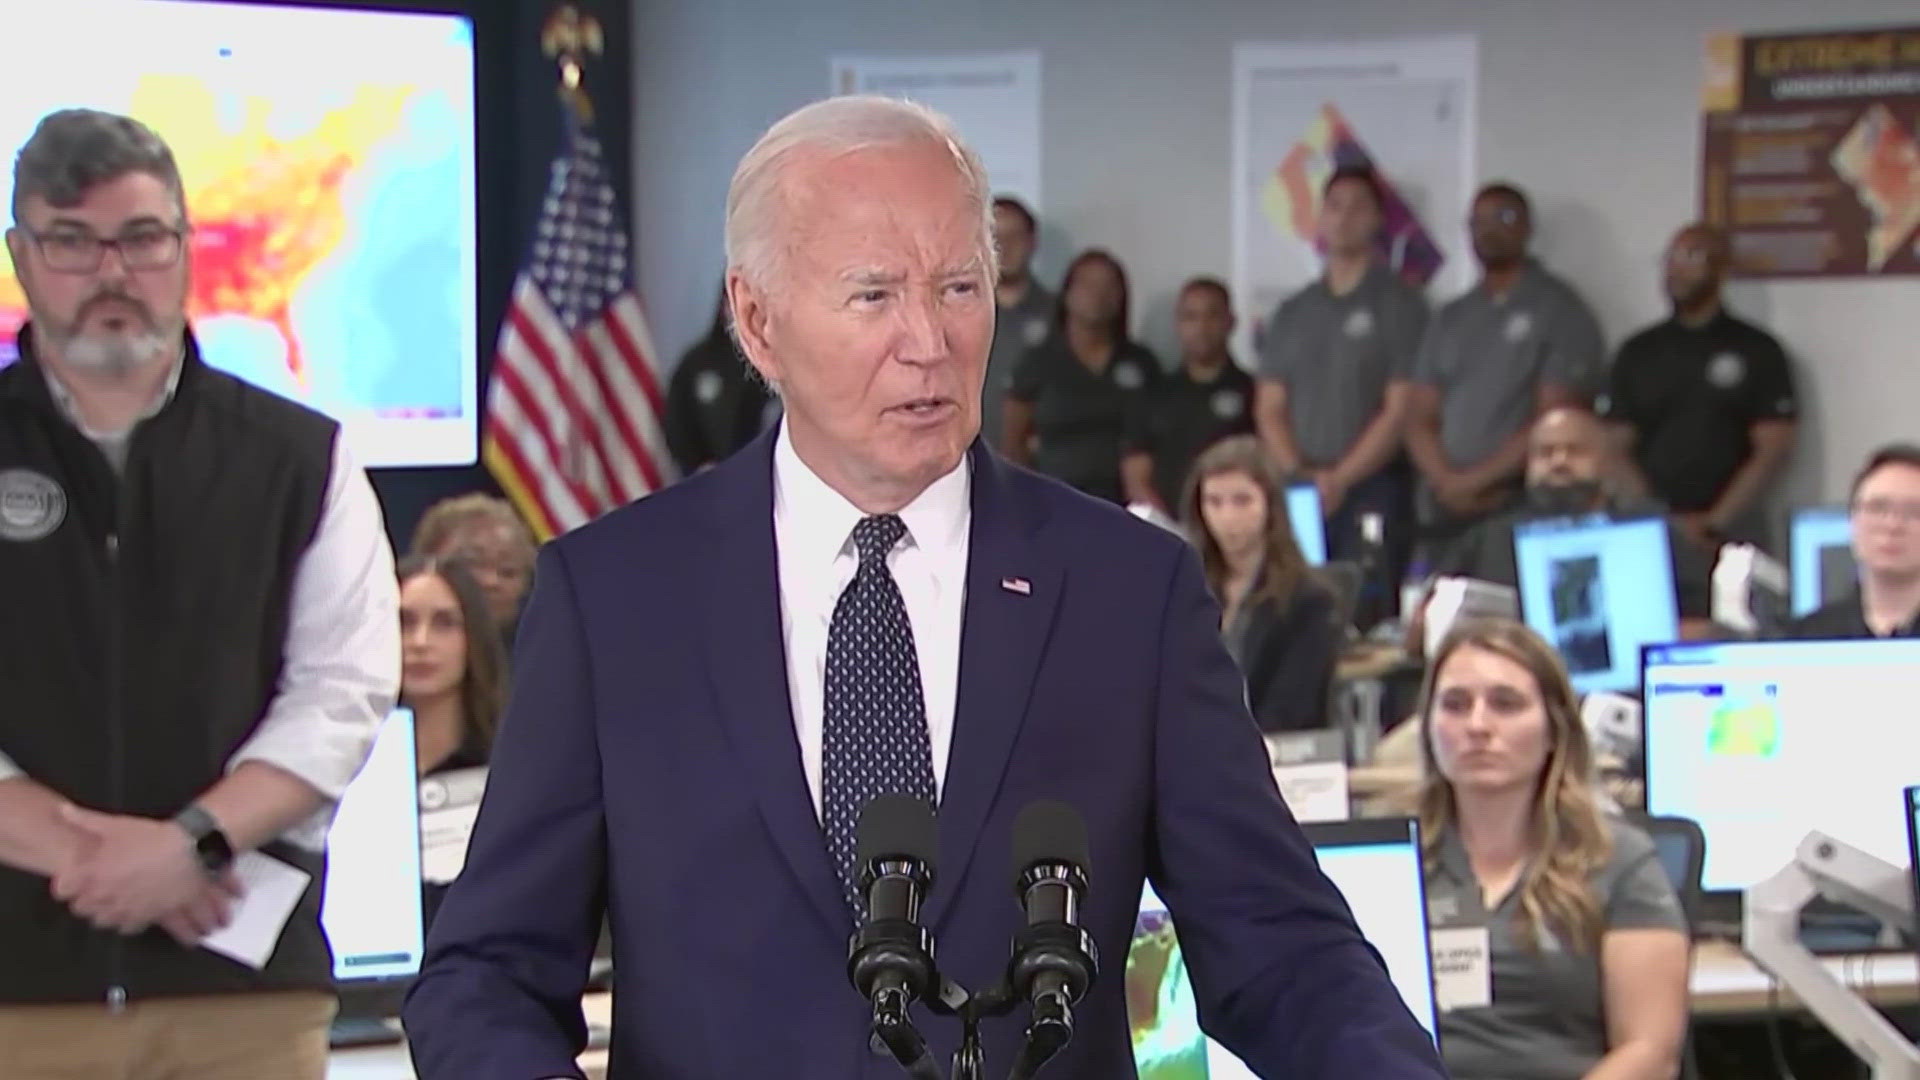 President Biden joined by DC Mayor Muriel Bowser and Clint Osborn, the acting director of DC's Homeland Security and Emergency Management Agency.